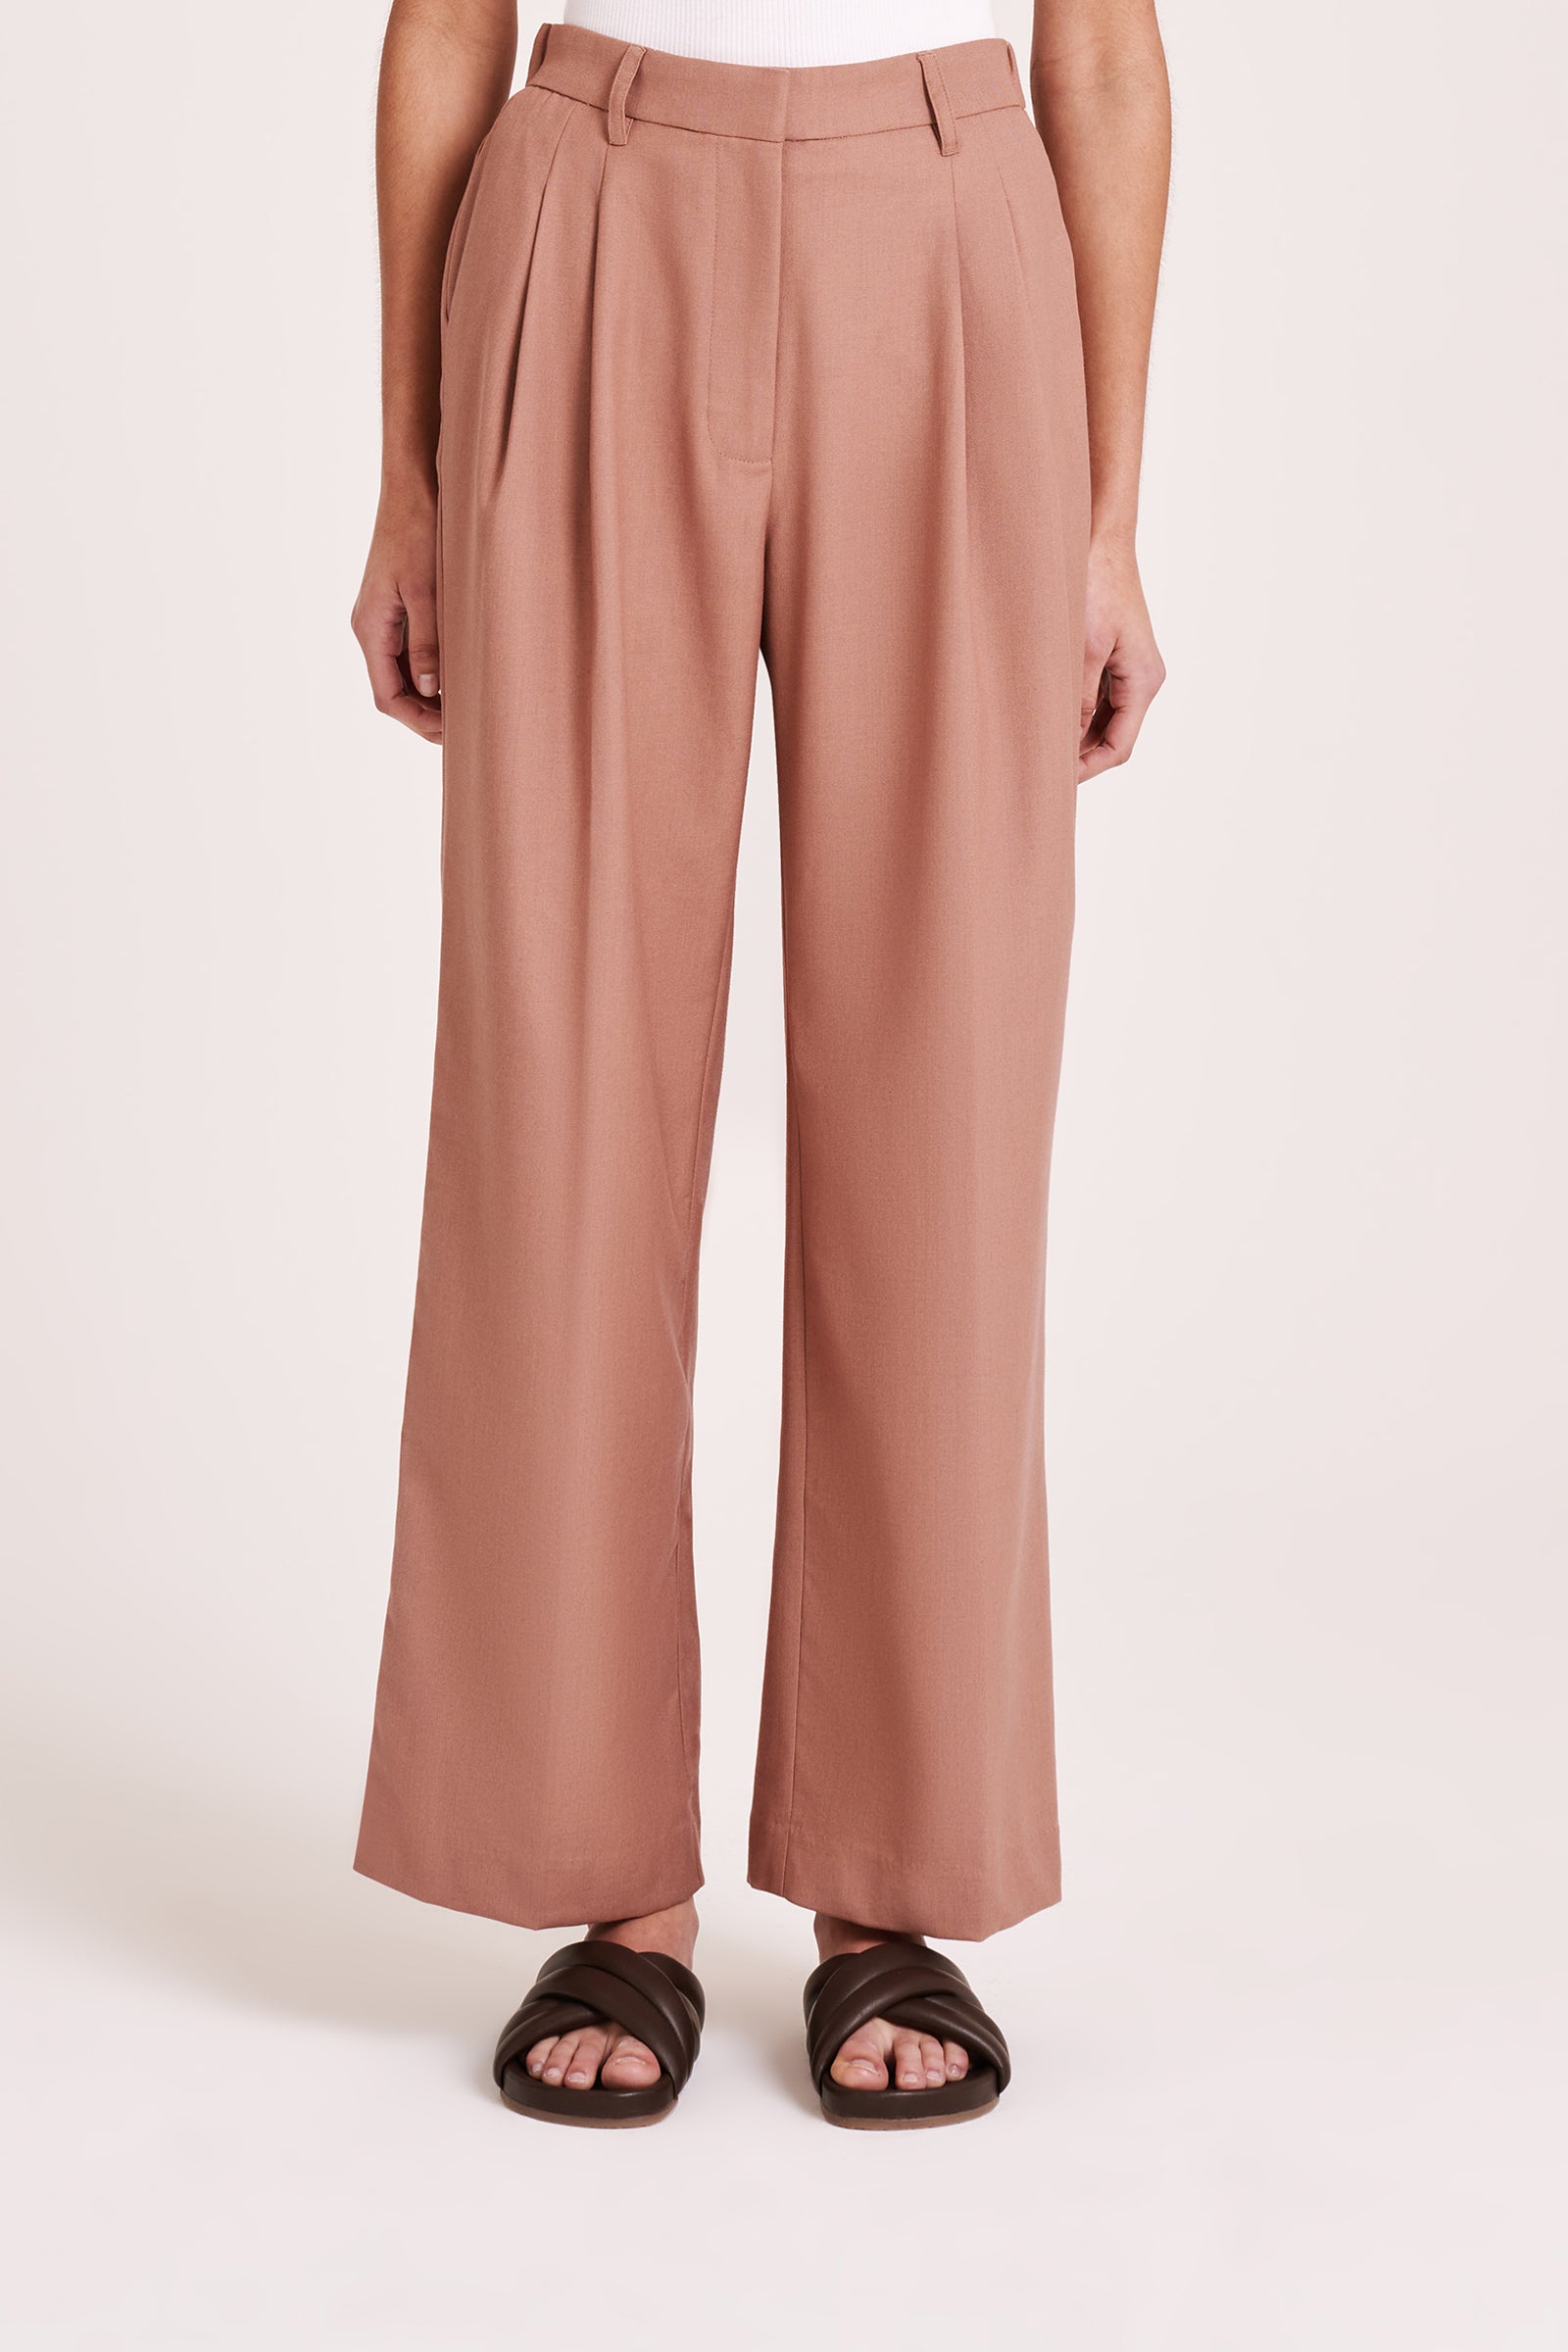 Monte Tailored Pant Russet 